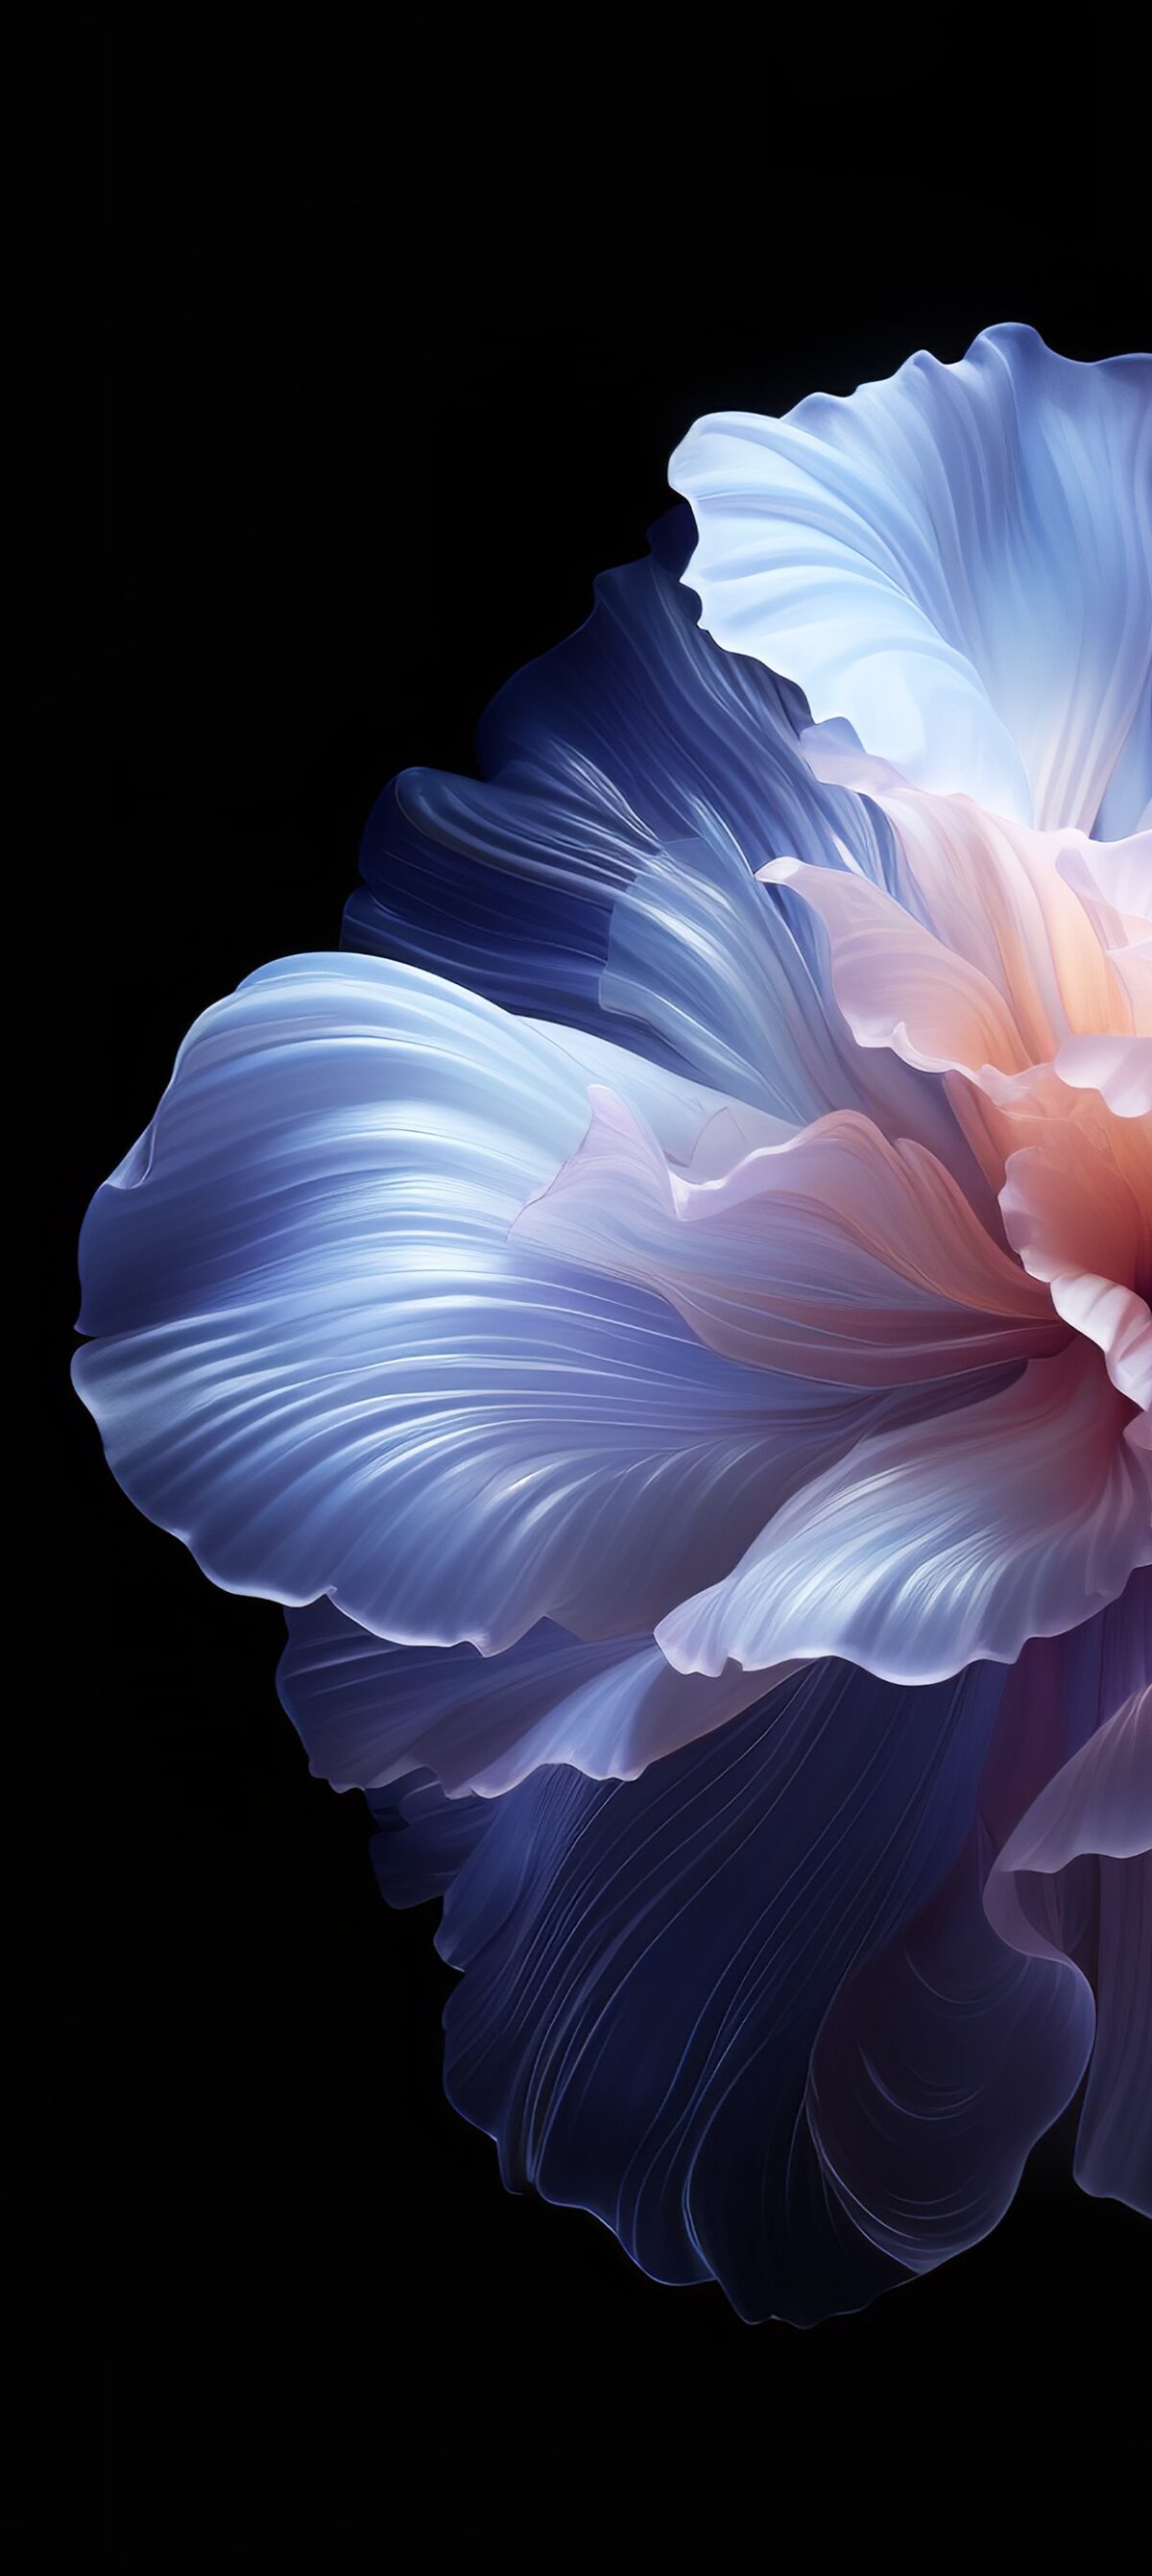 Delicate Flower - Wallpapers Central